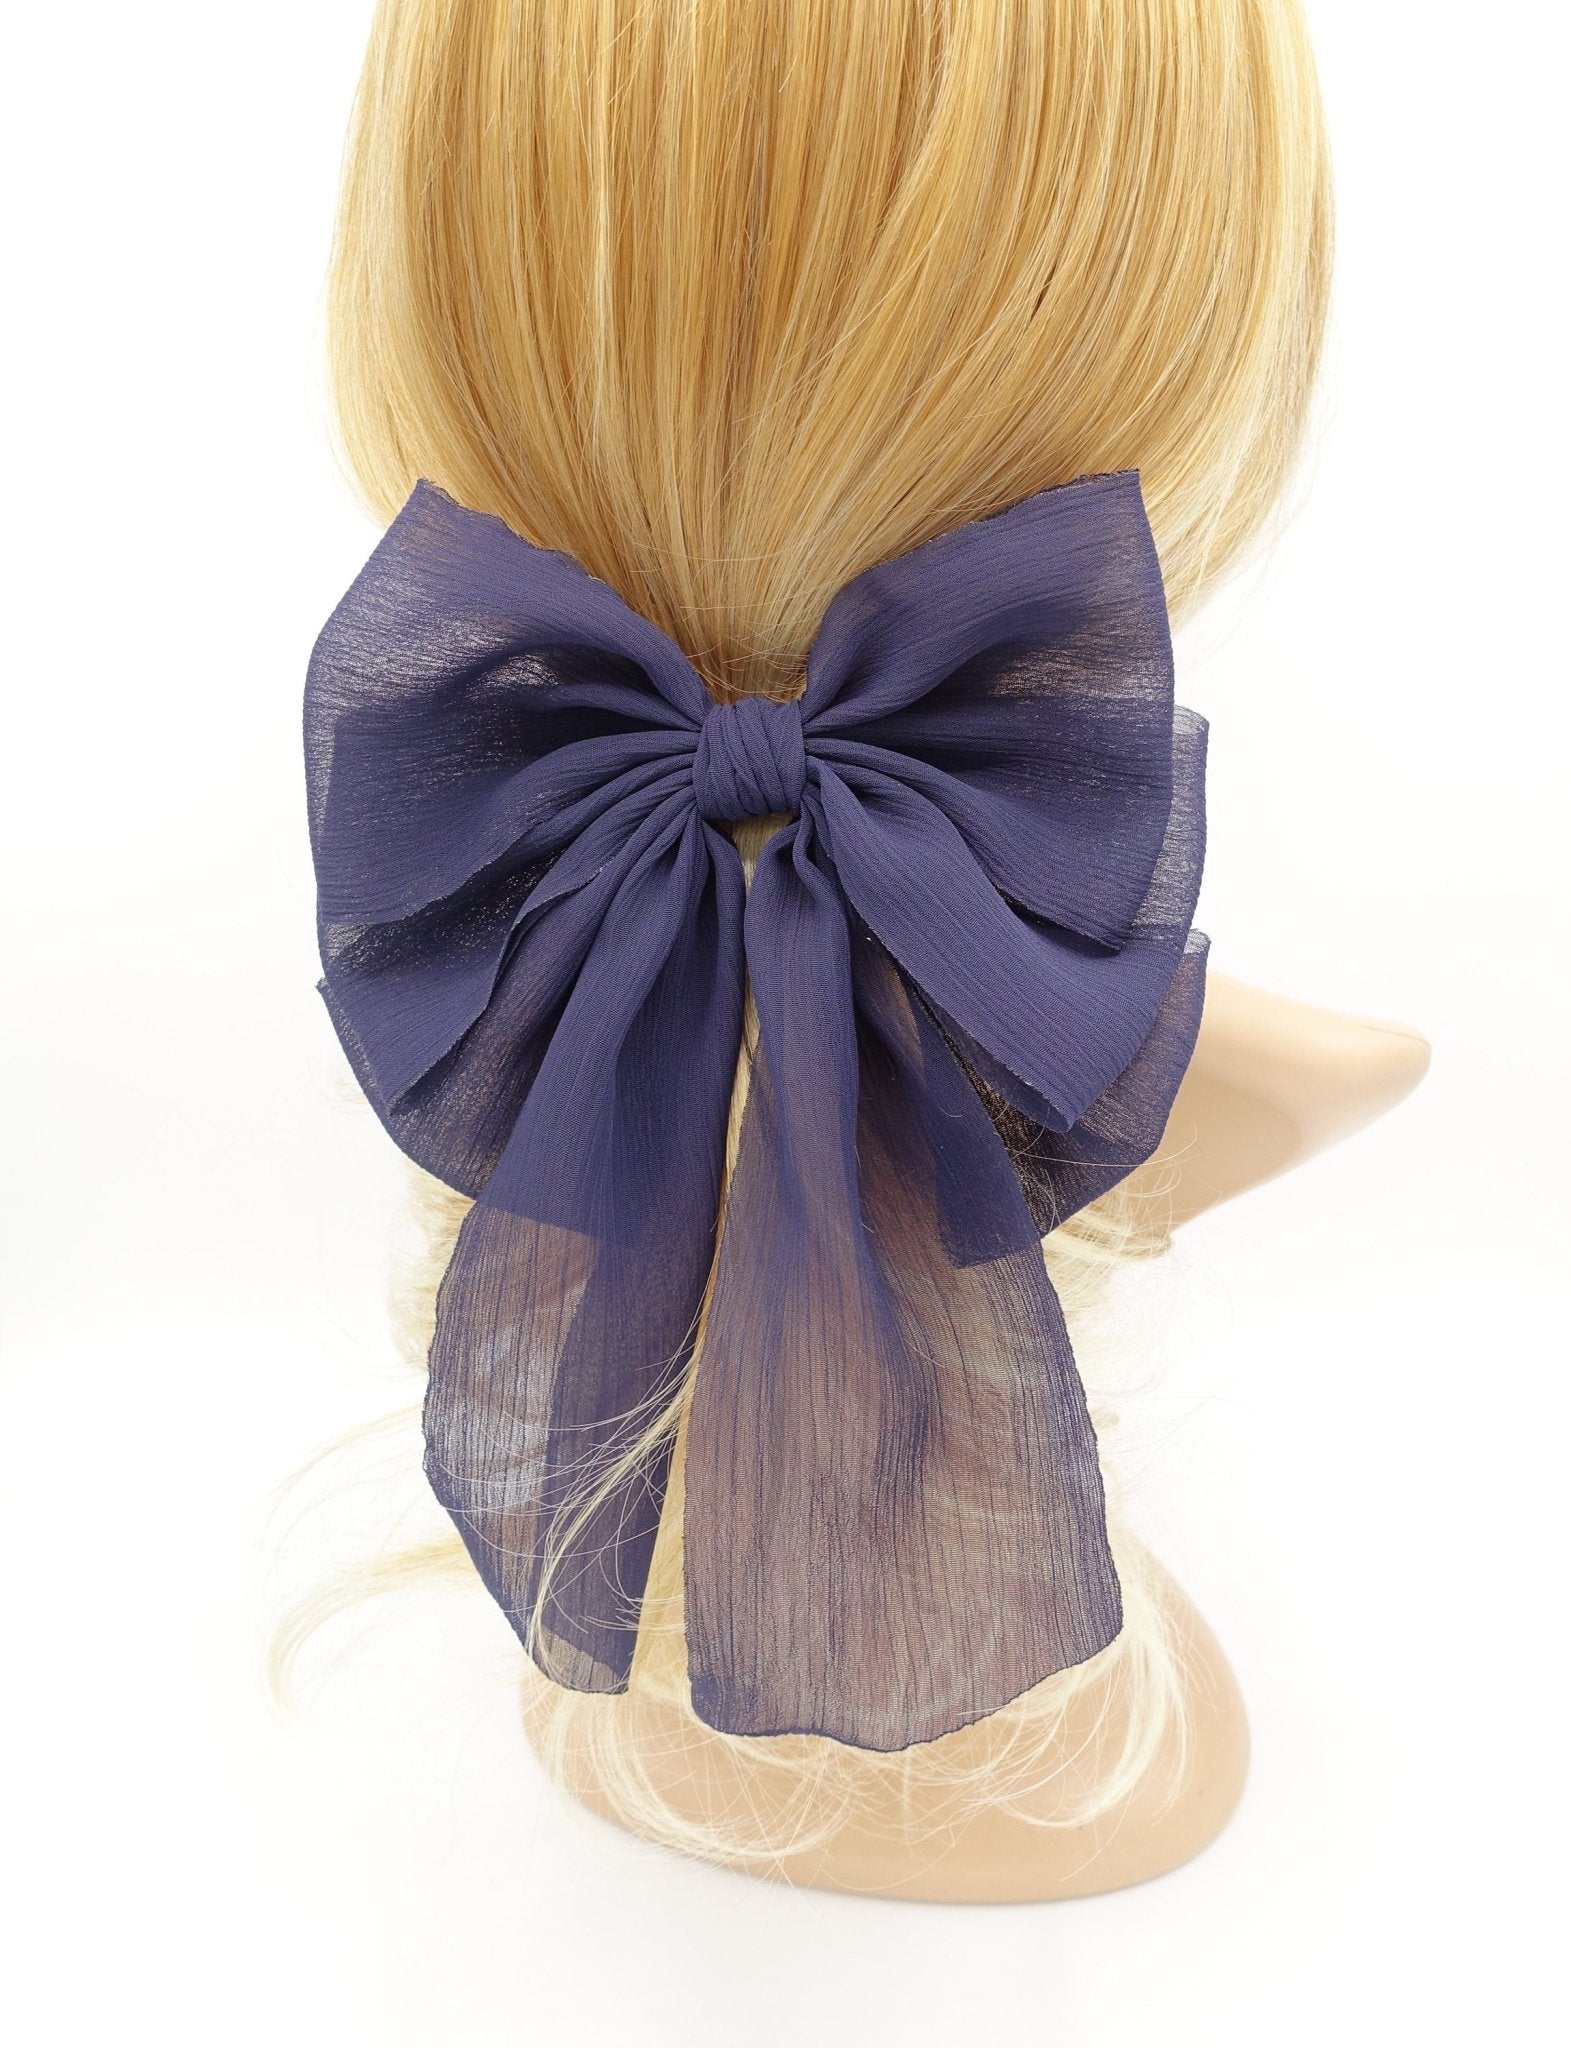 VeryShine double layered bow wide tail women hair accessory chiffon volume hair accessory for women